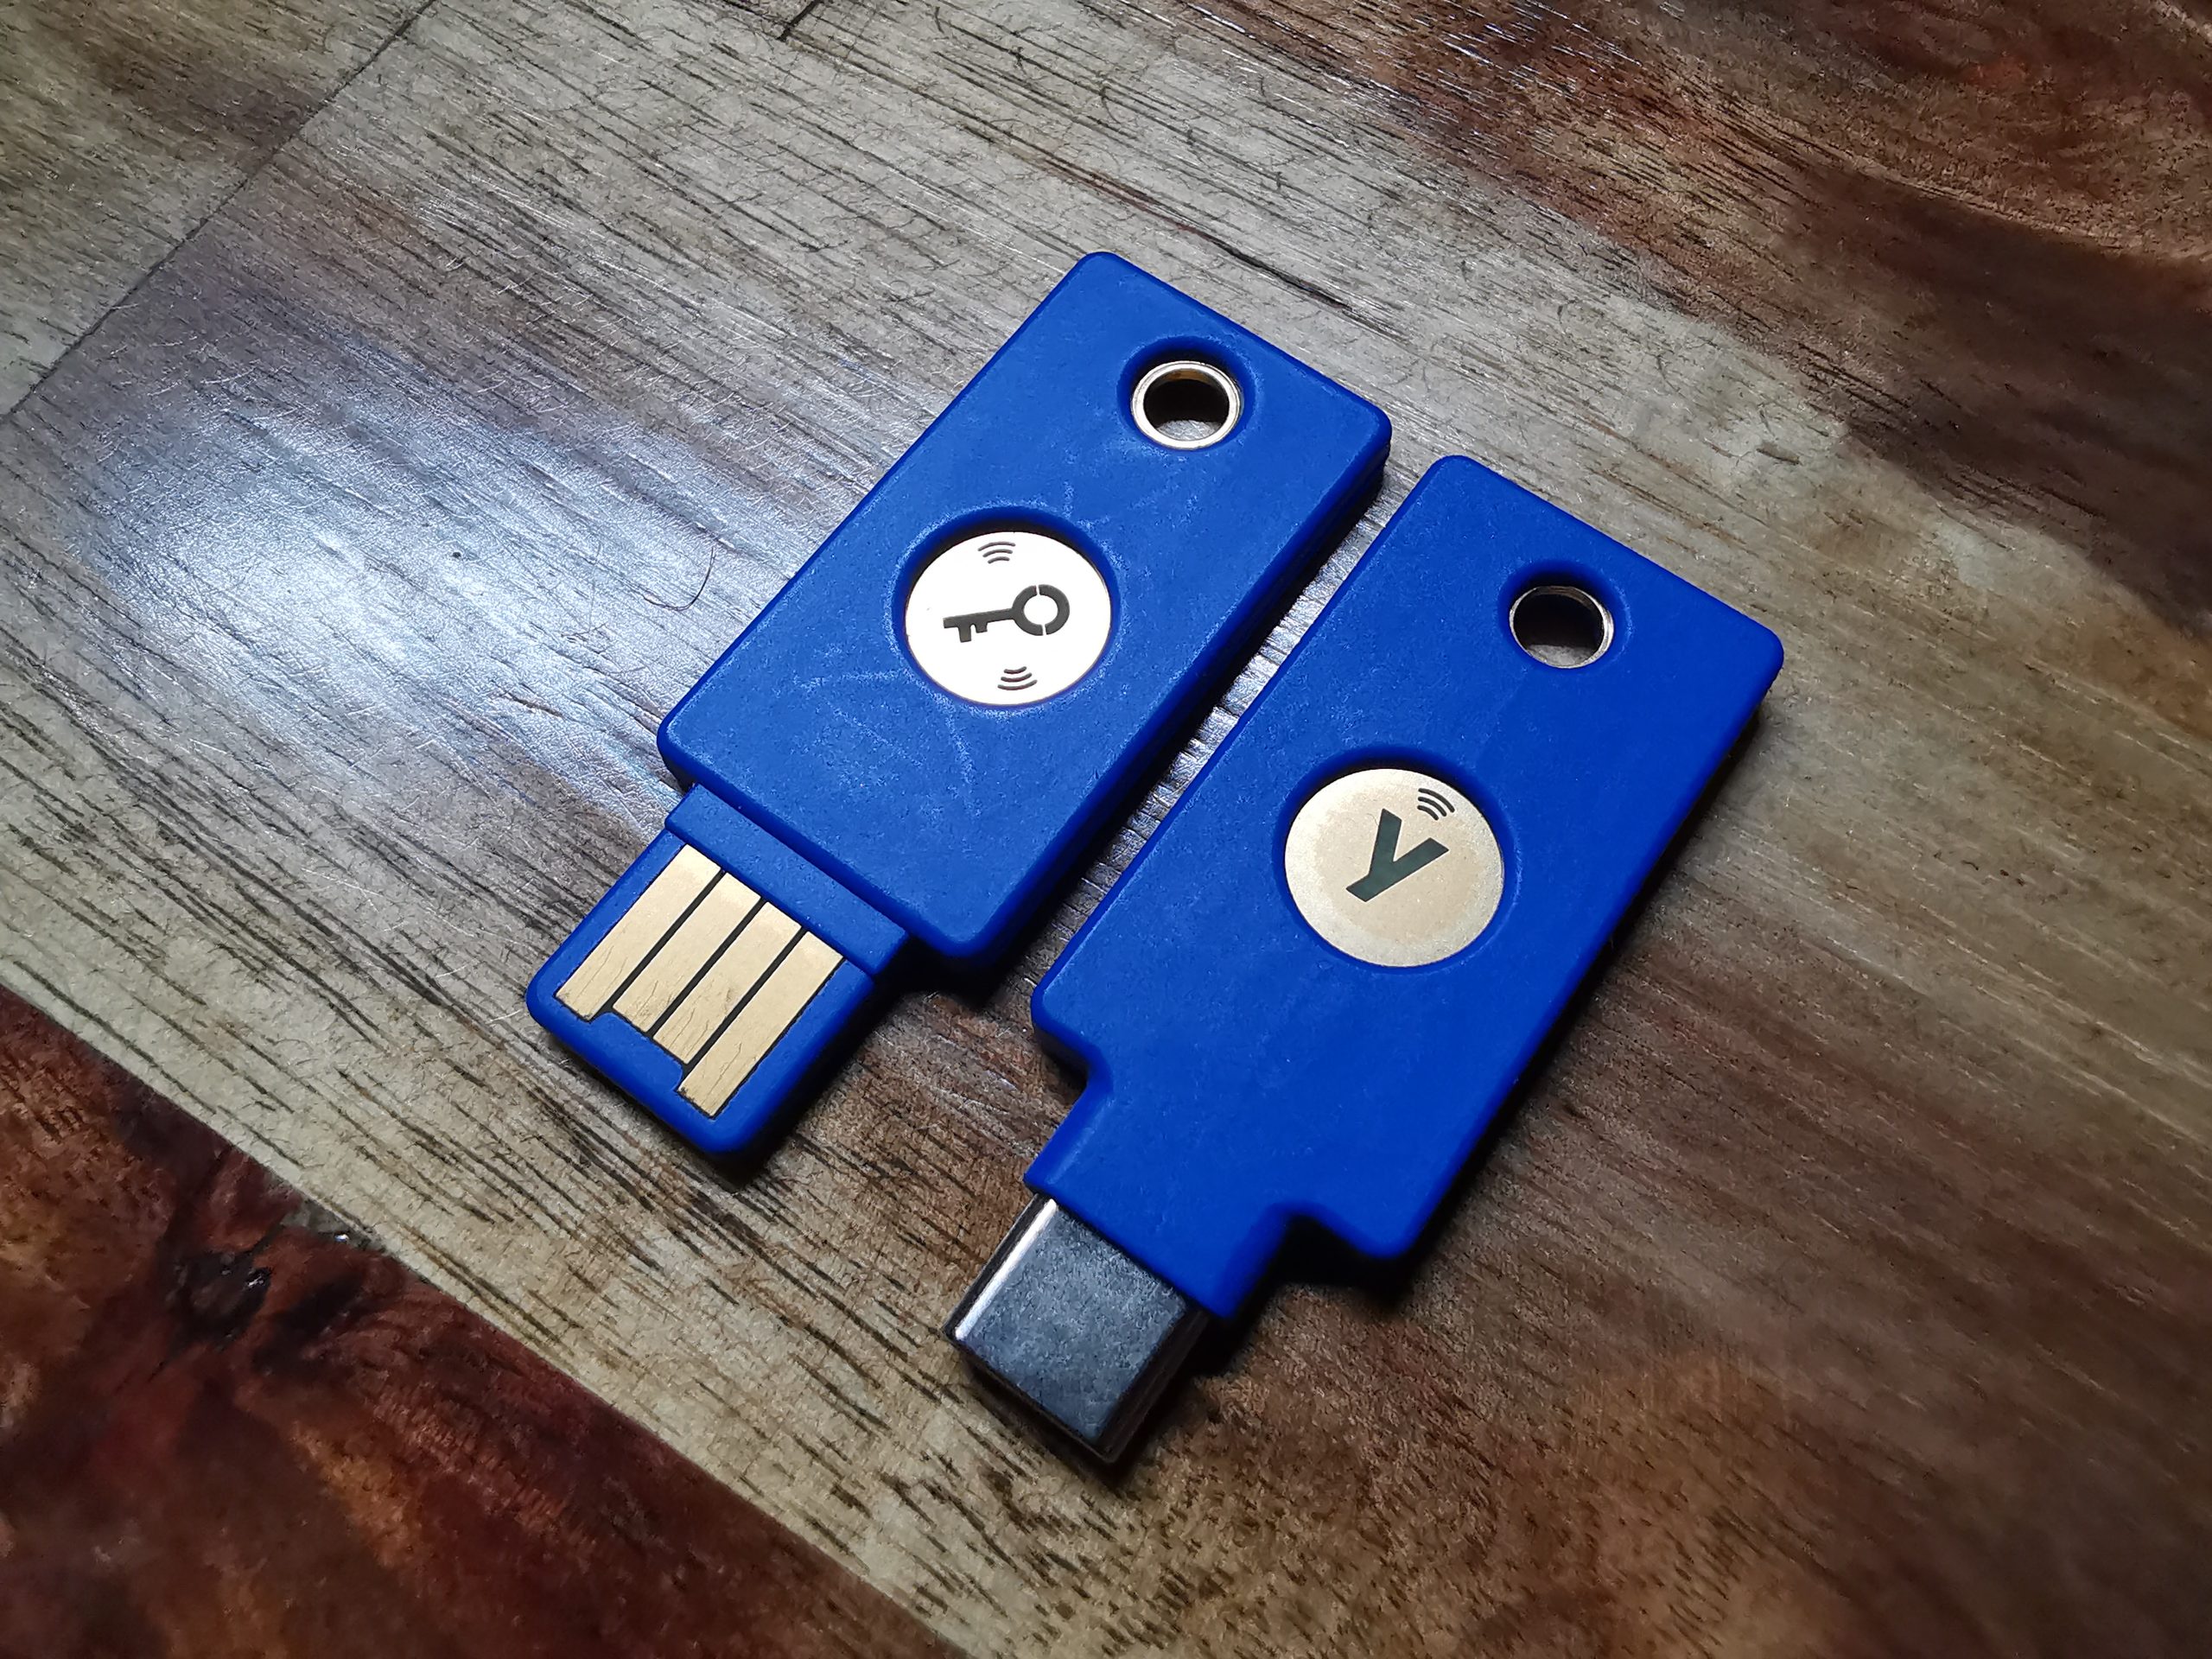 Buy cheap BLOCKPOST MOBILE cd key - lowest price